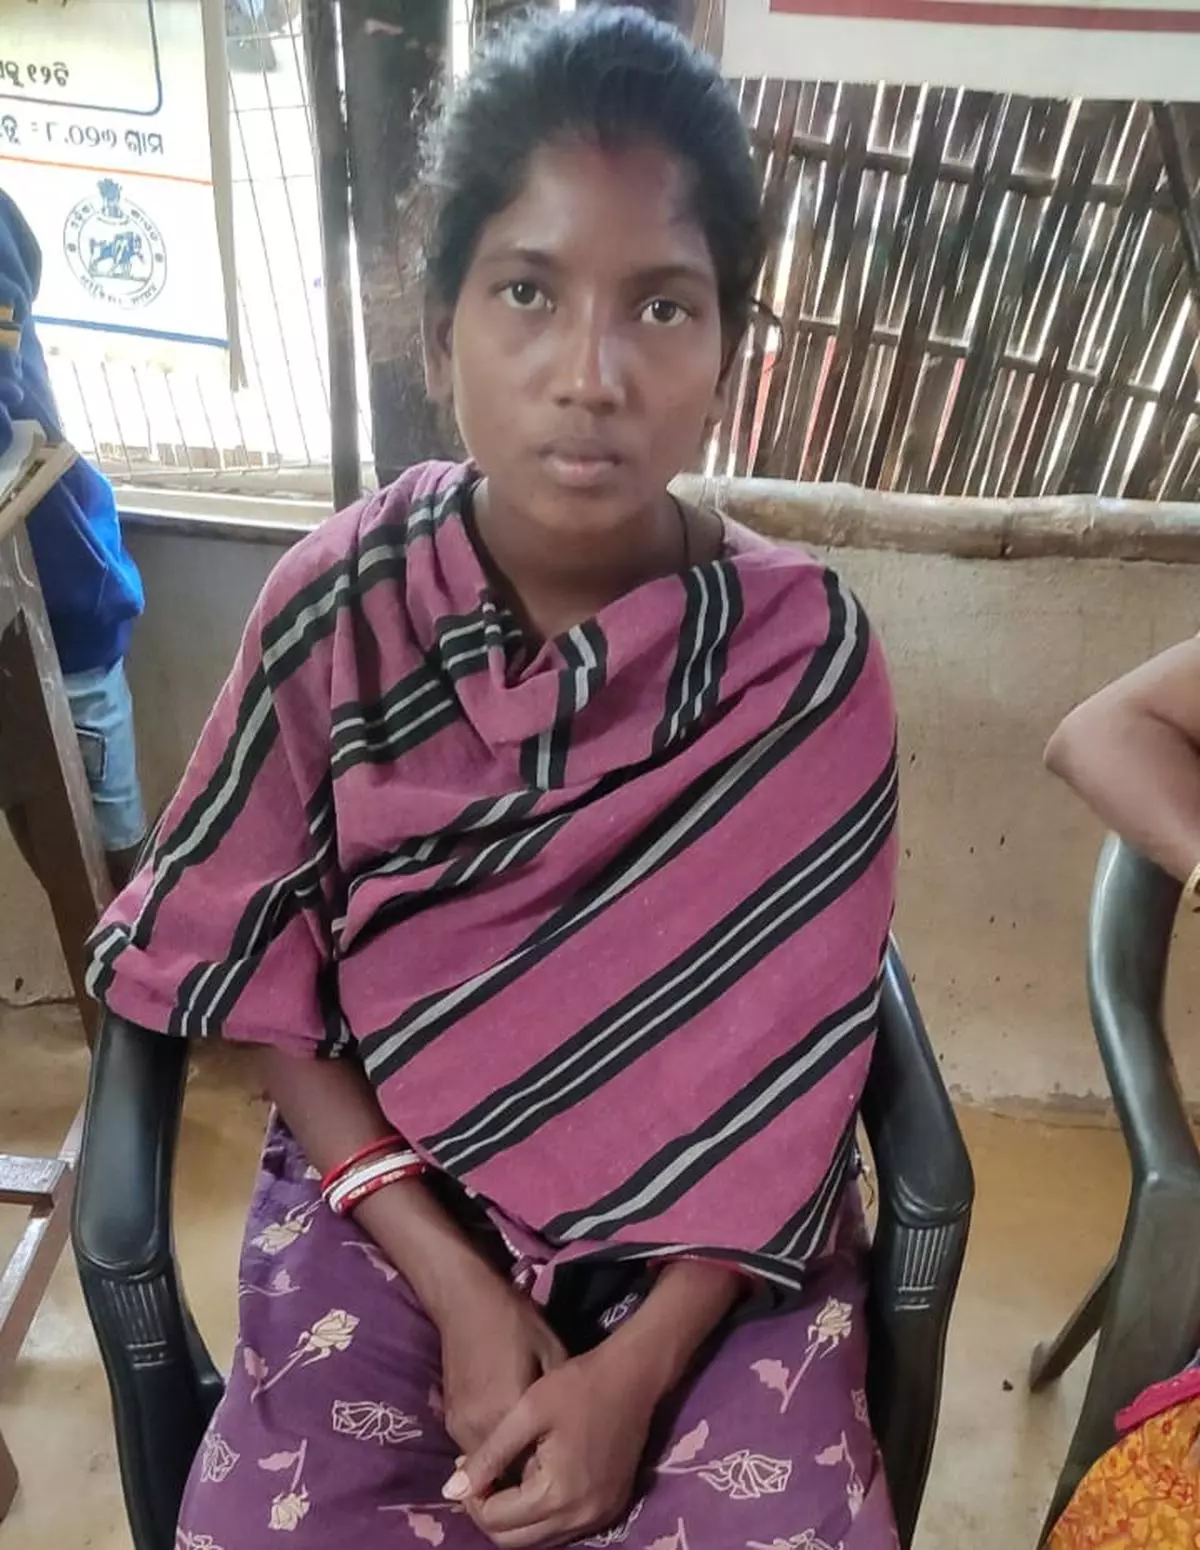 Shibani Kerayi, 26, said she had been deprived of rations since 2016 because, as officials claimed, she could not submit her Aadhaar details in time.